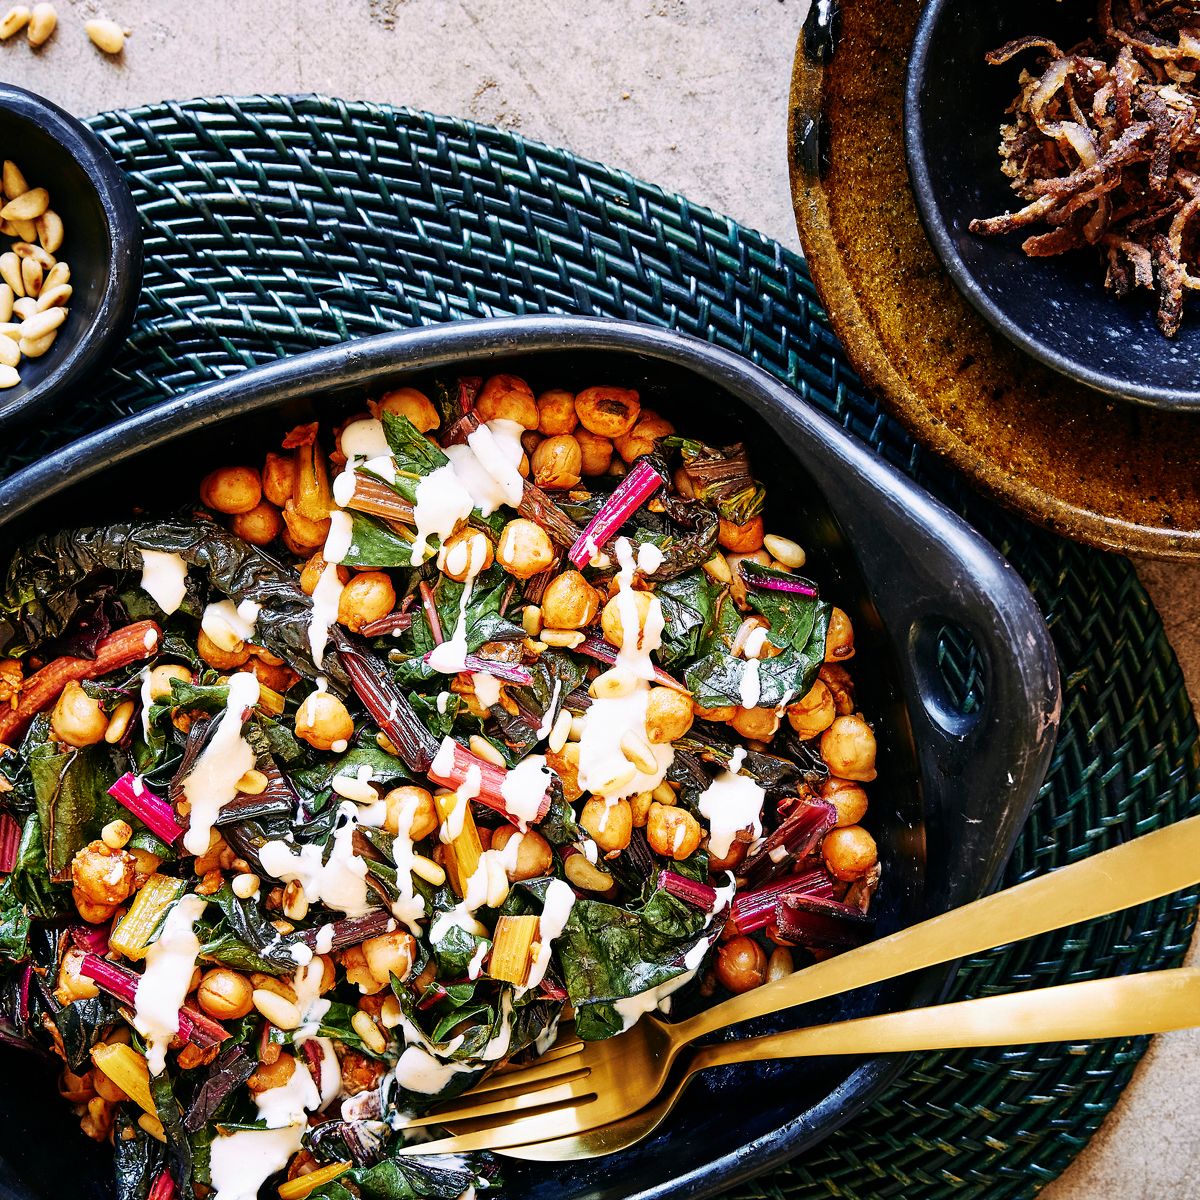 Rainbow Chard and Spiced Chickpea Salad with Pine Nuts